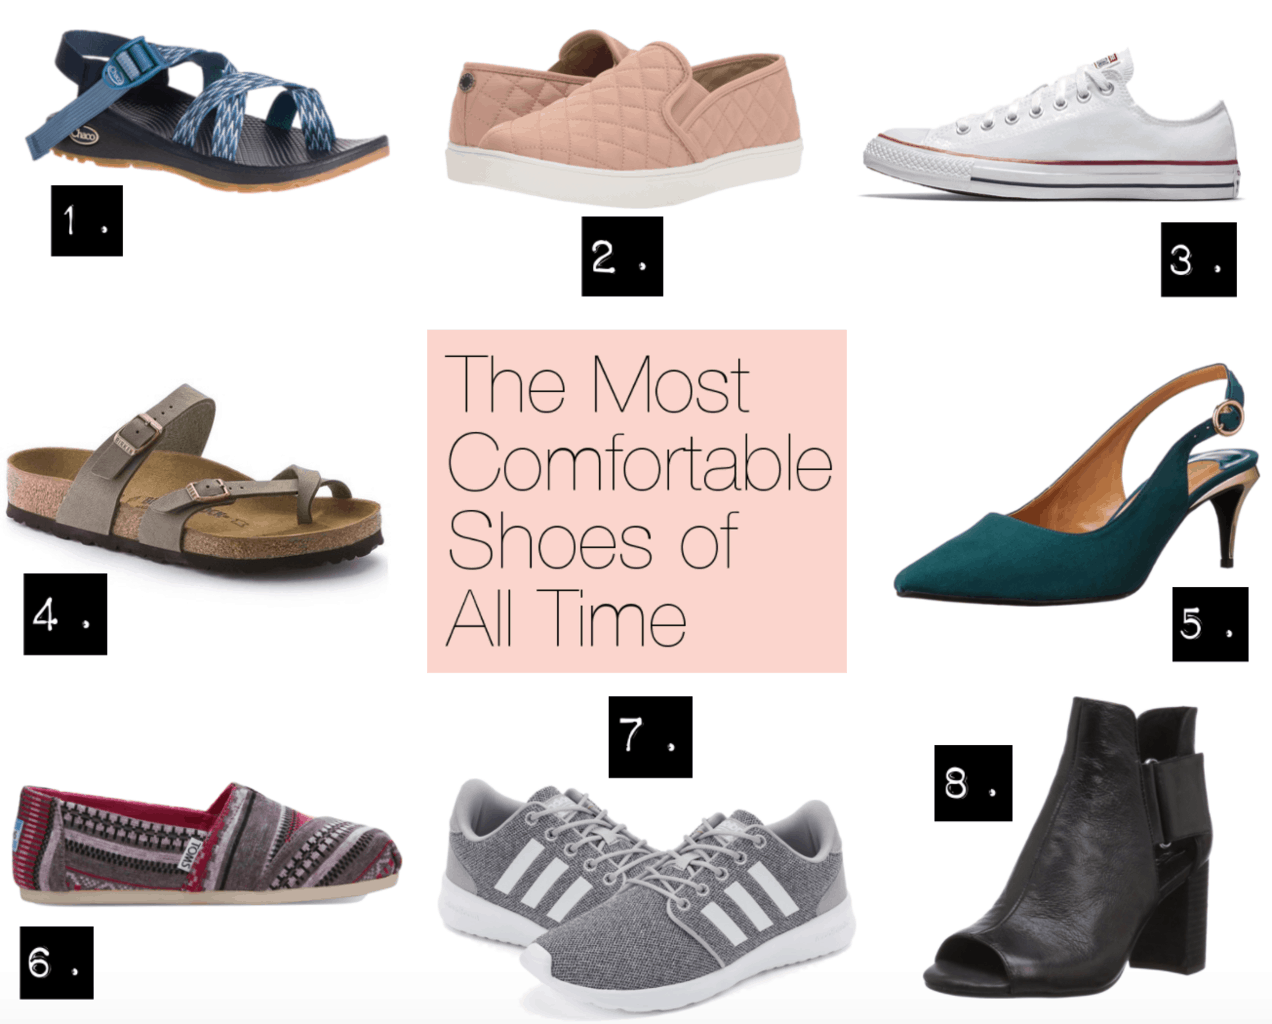 Comfortable Shoes for Women - Best 